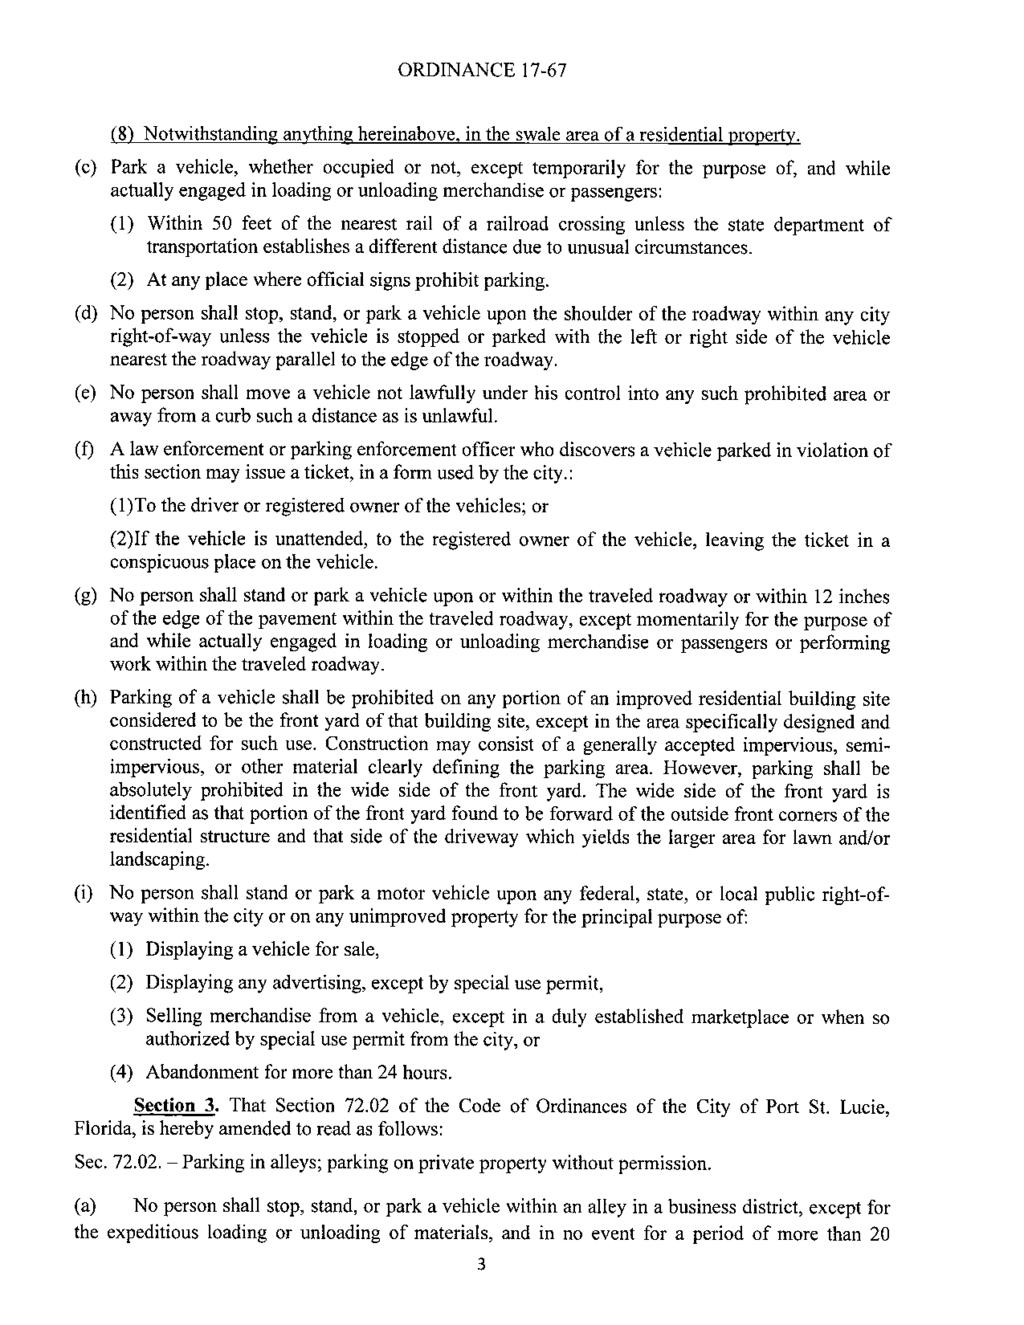 ORDINANCE 17-67 (8) Notwithstanding anything hereinabove, in the swale area of a residential property.